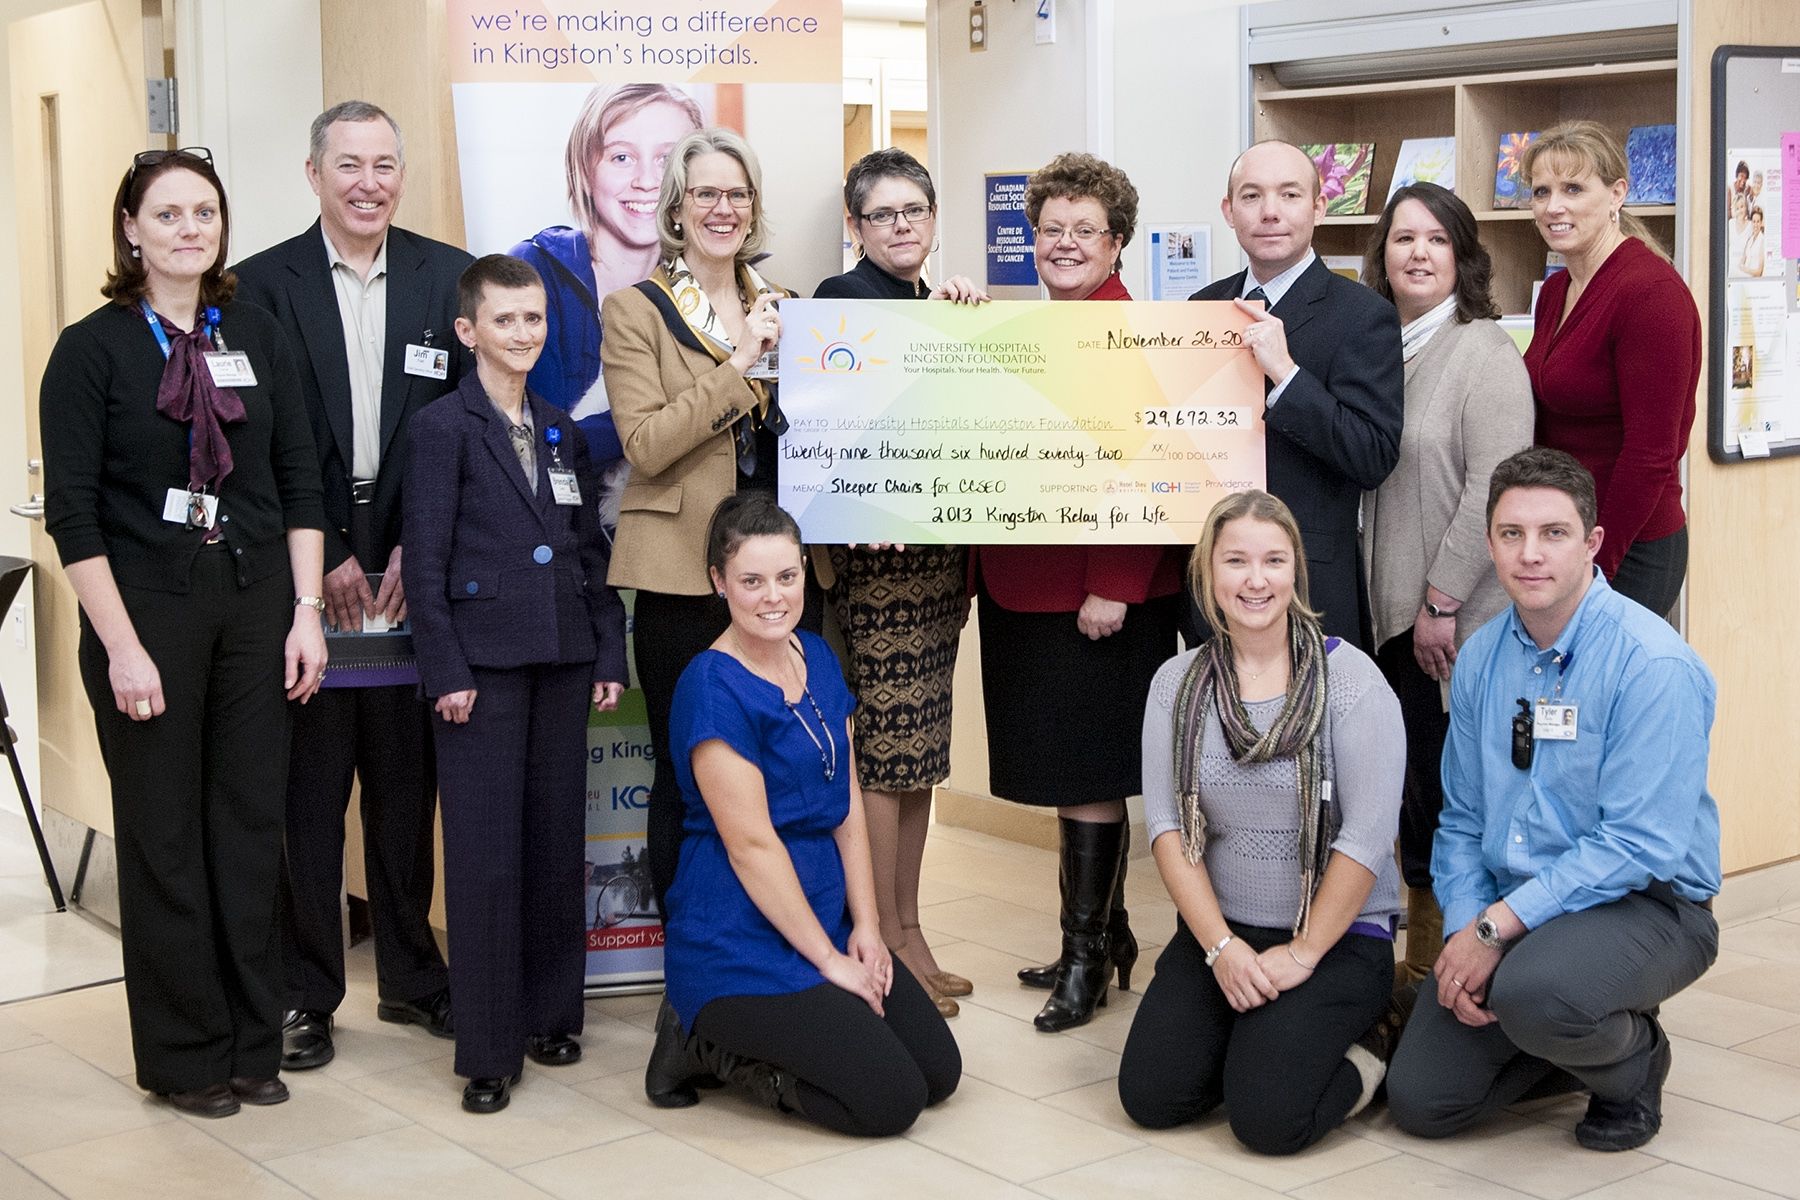 Last year nearly $30,000 was raised to support cancer care at KGH through Relay for Life. This year funds will support a new dermatology clinic at the Cancer Centre.